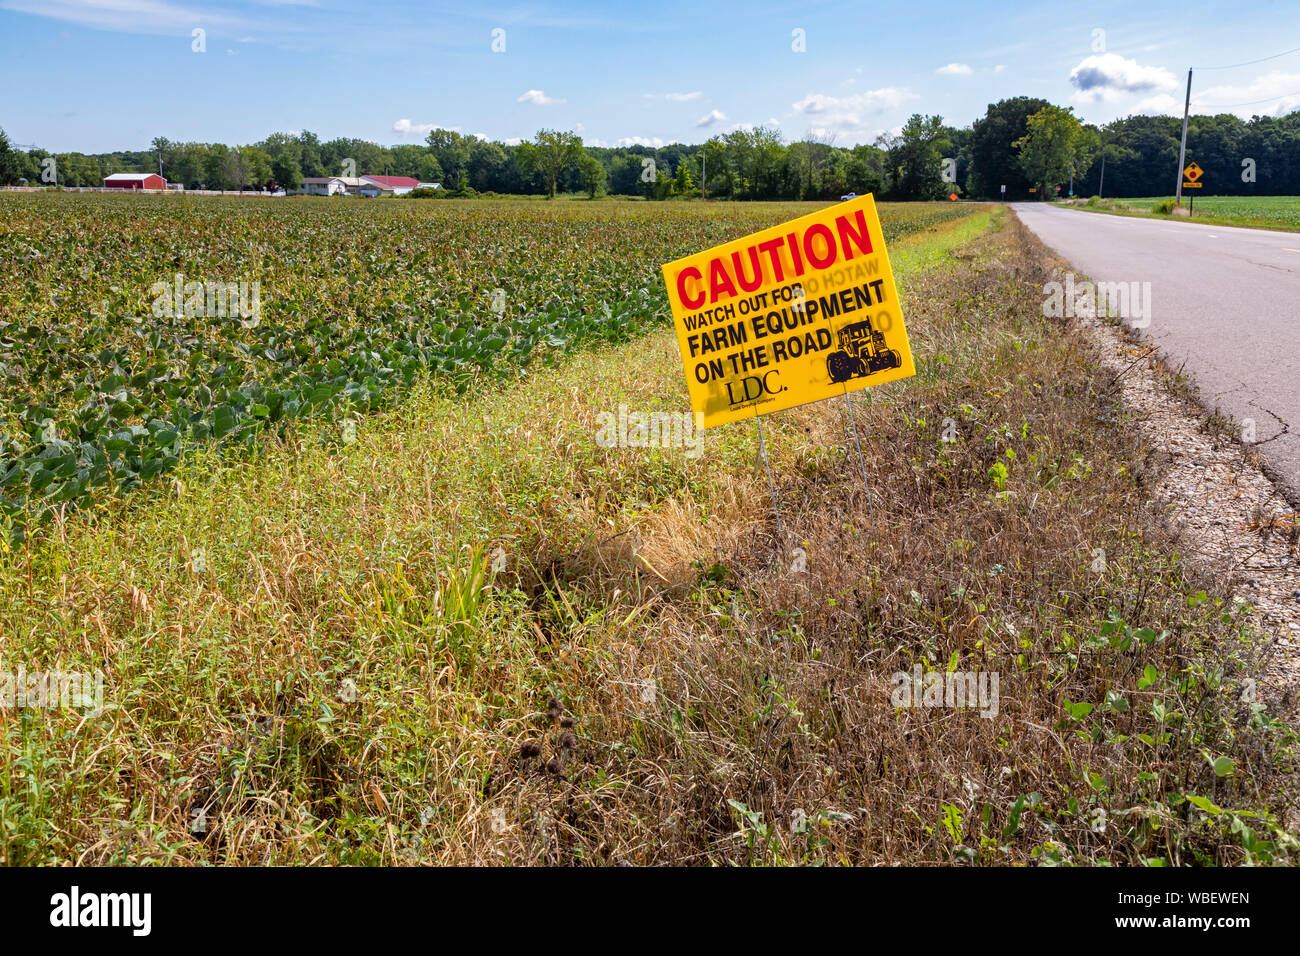 Three Oaks, Michigan - A sign warns motorists to watch out for farm equipment on a rural road. Stock Photo